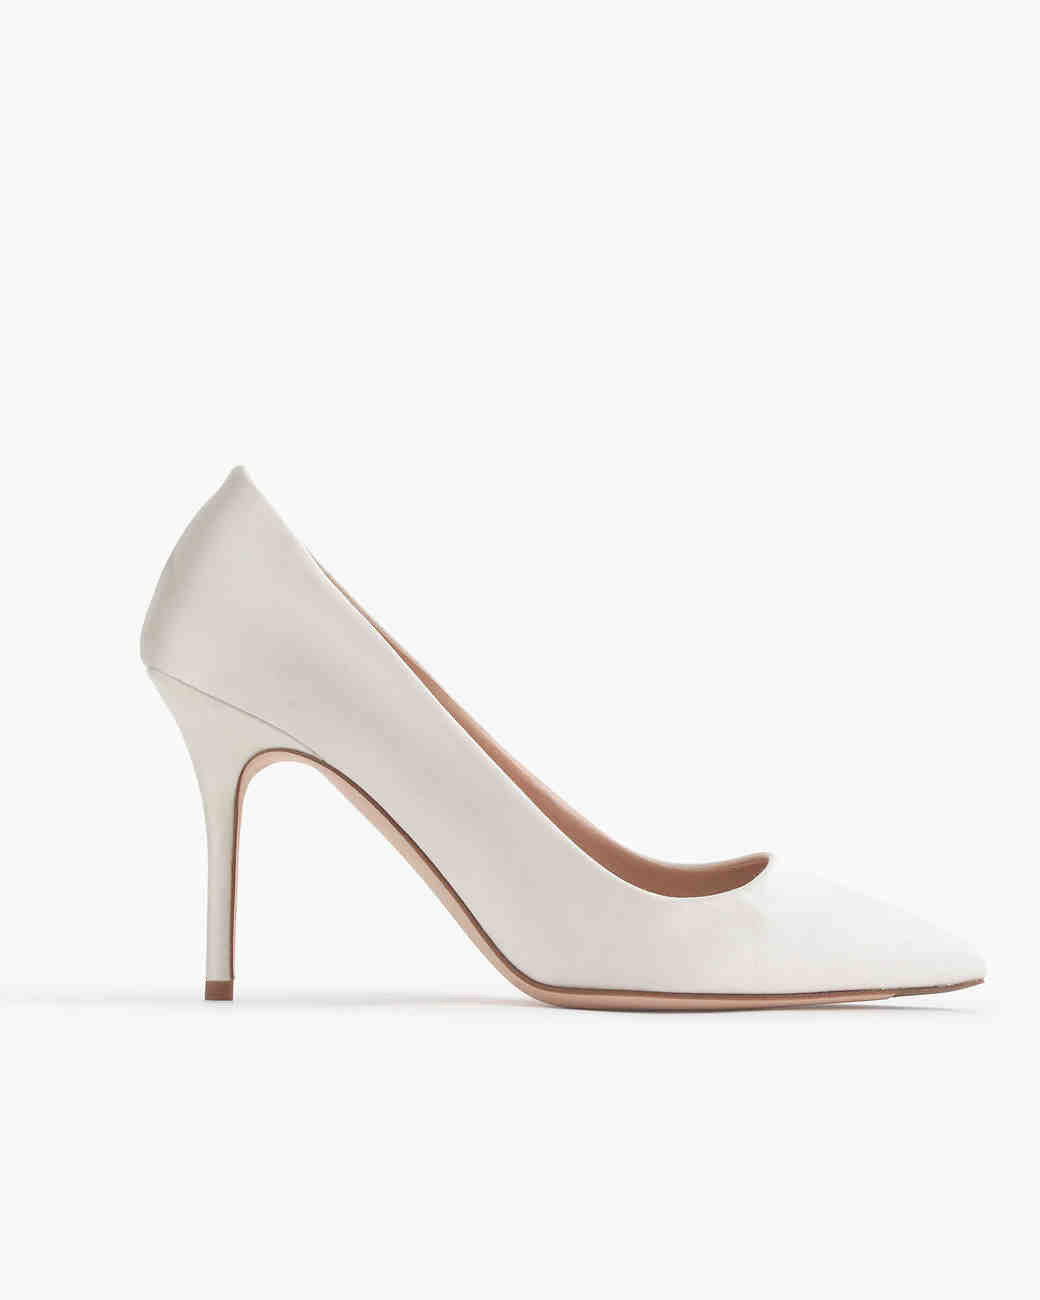 Jcrew Wedding Shoes
 13 Evening Shoes for Your Winter Wedding